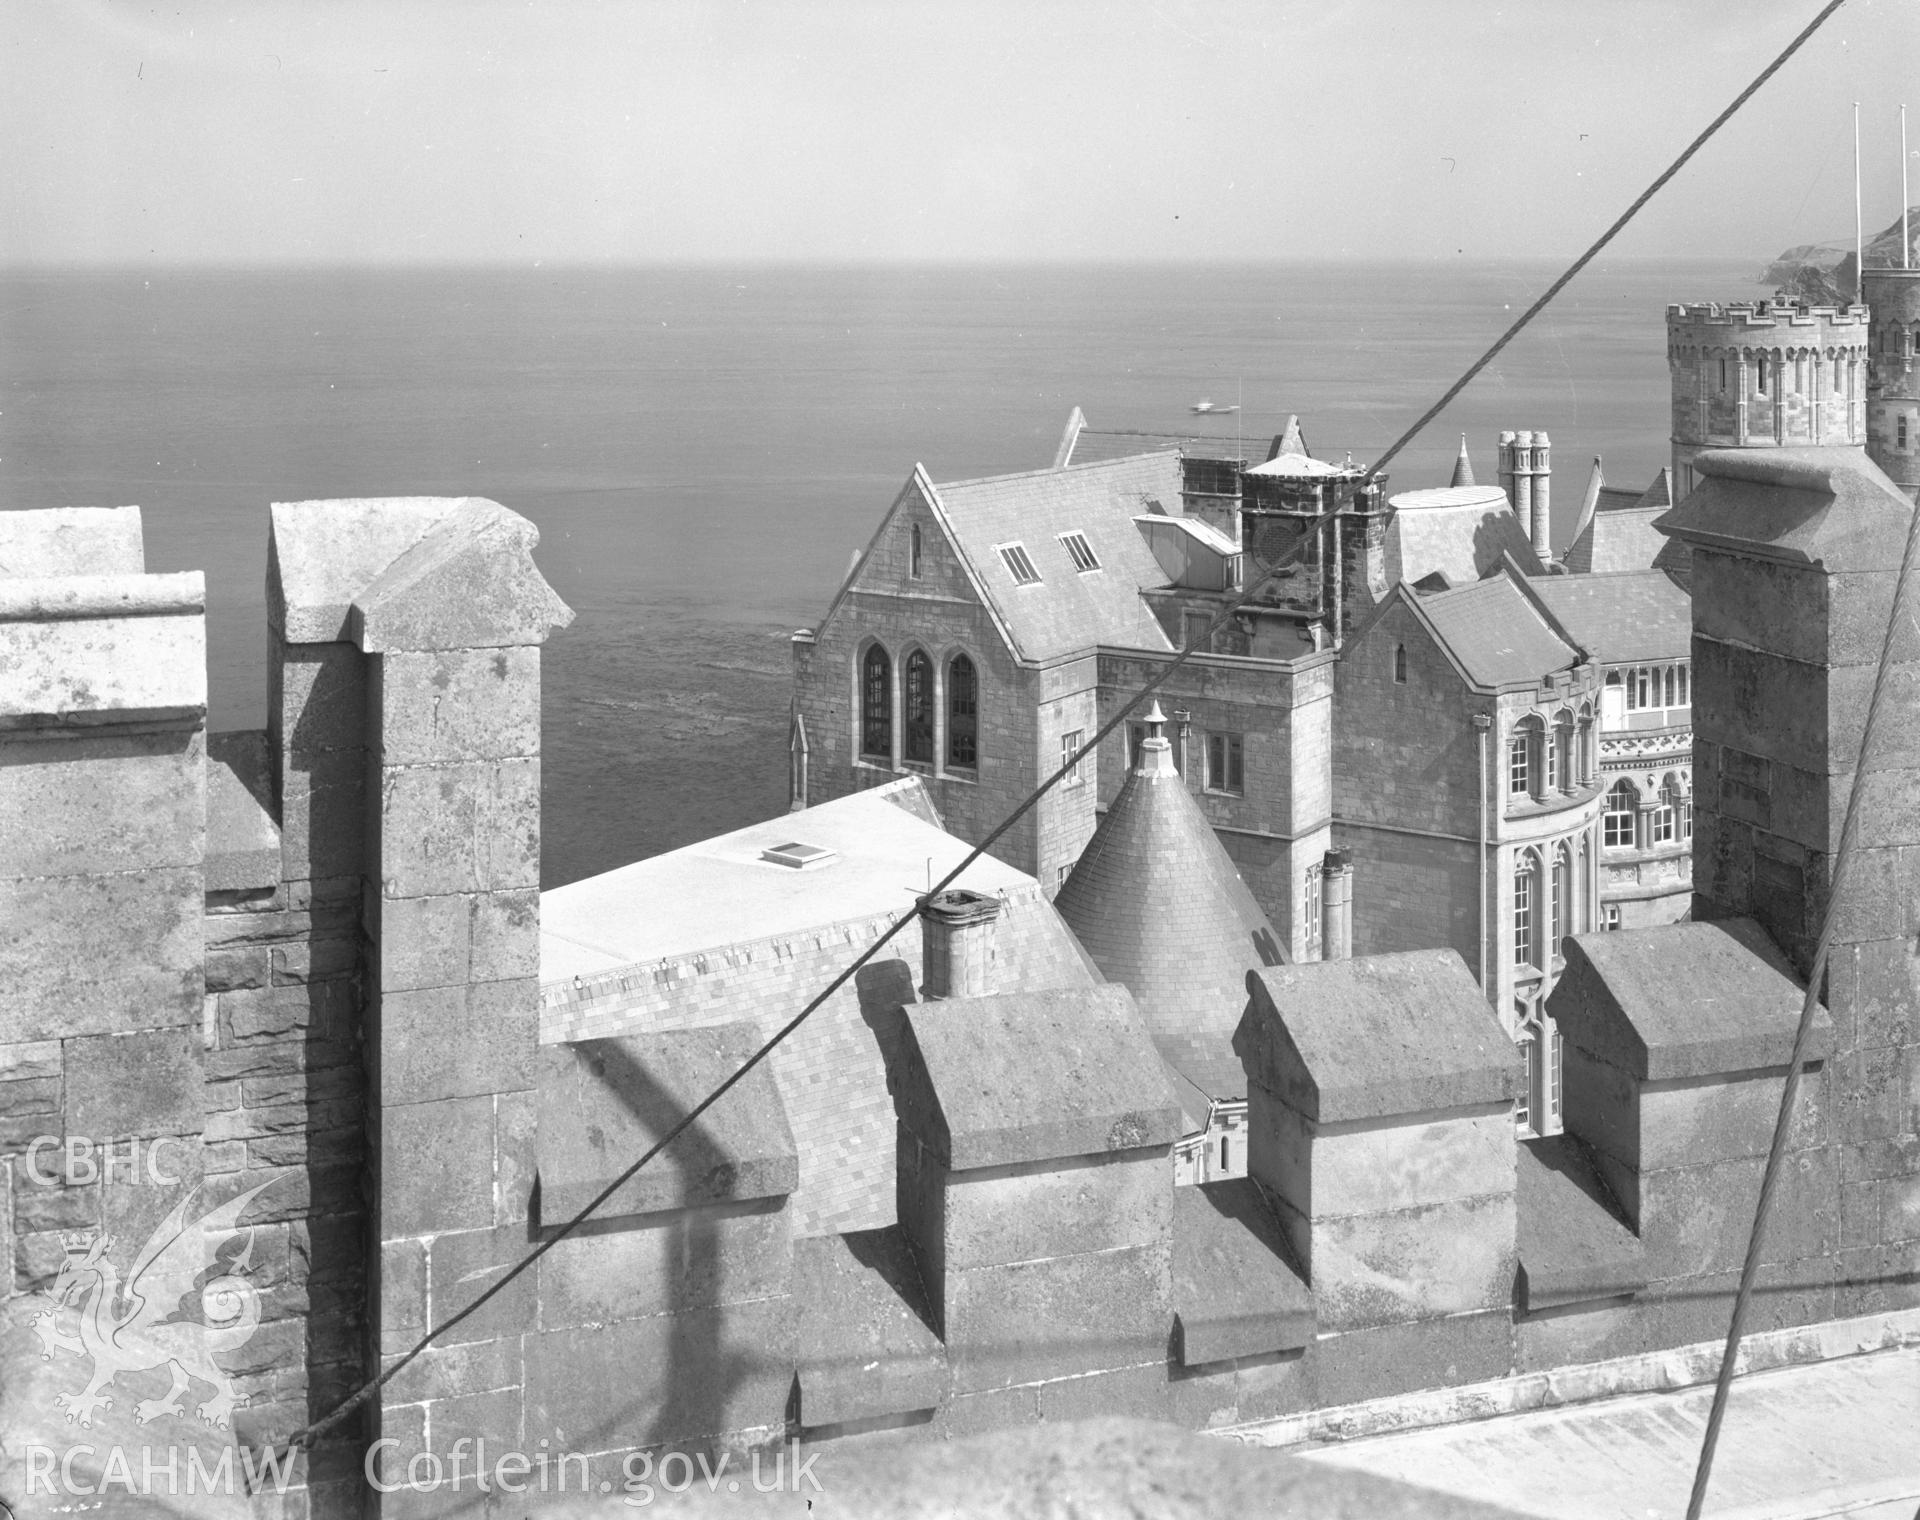 Black and white acetate negative showing a view of Old College, Aberystwyth.